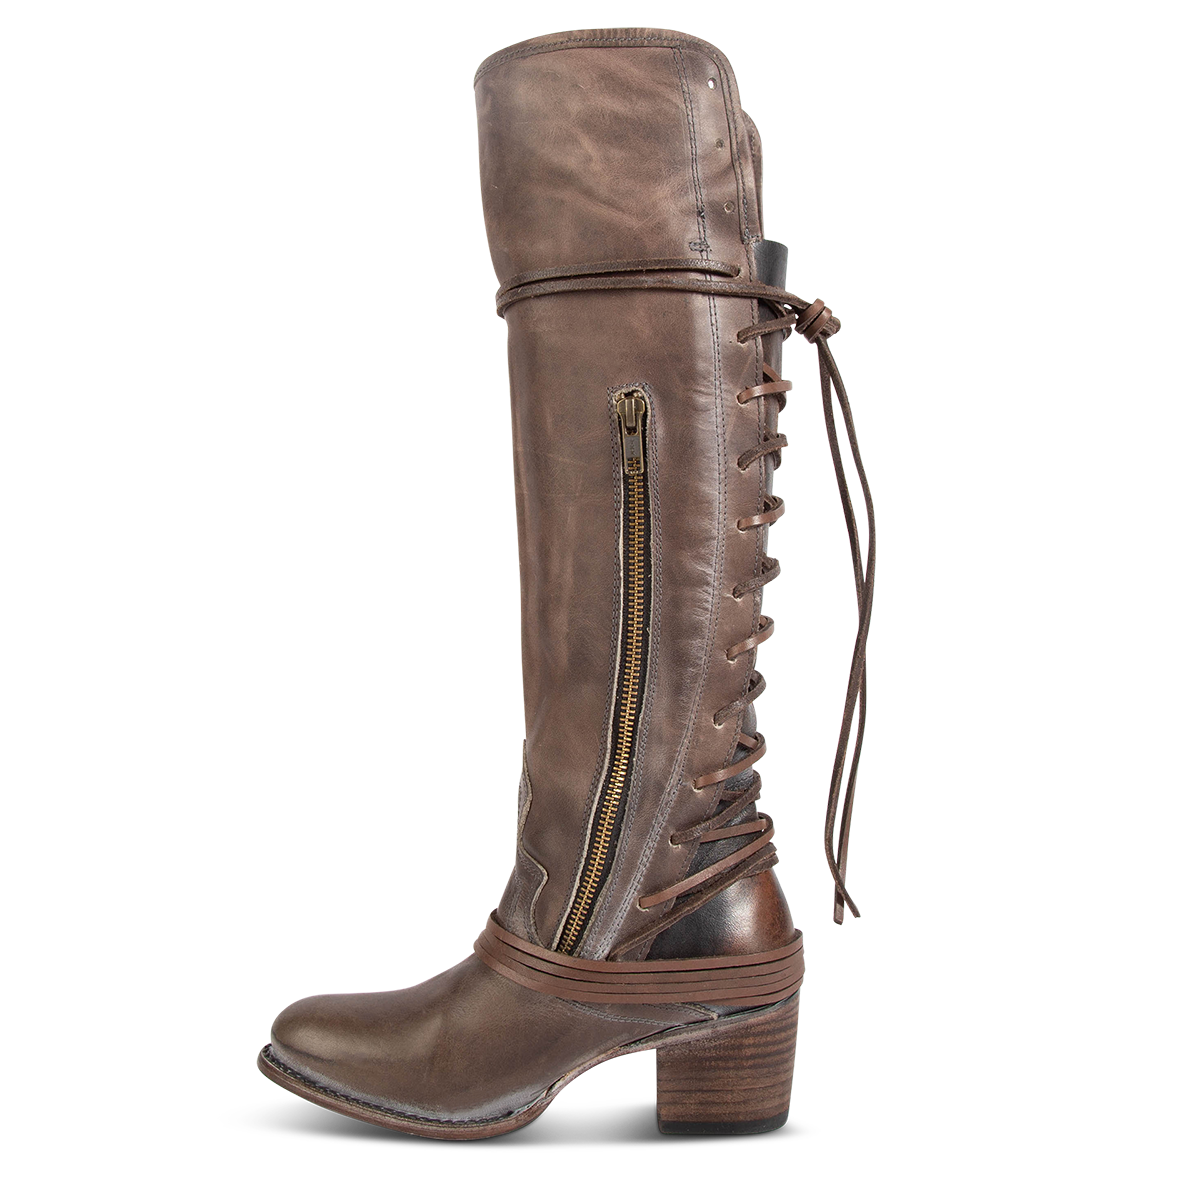 Inside view showing working brass zip closure and adjustable wrap around laces on FREEBIRD women's Coal stone tall boot